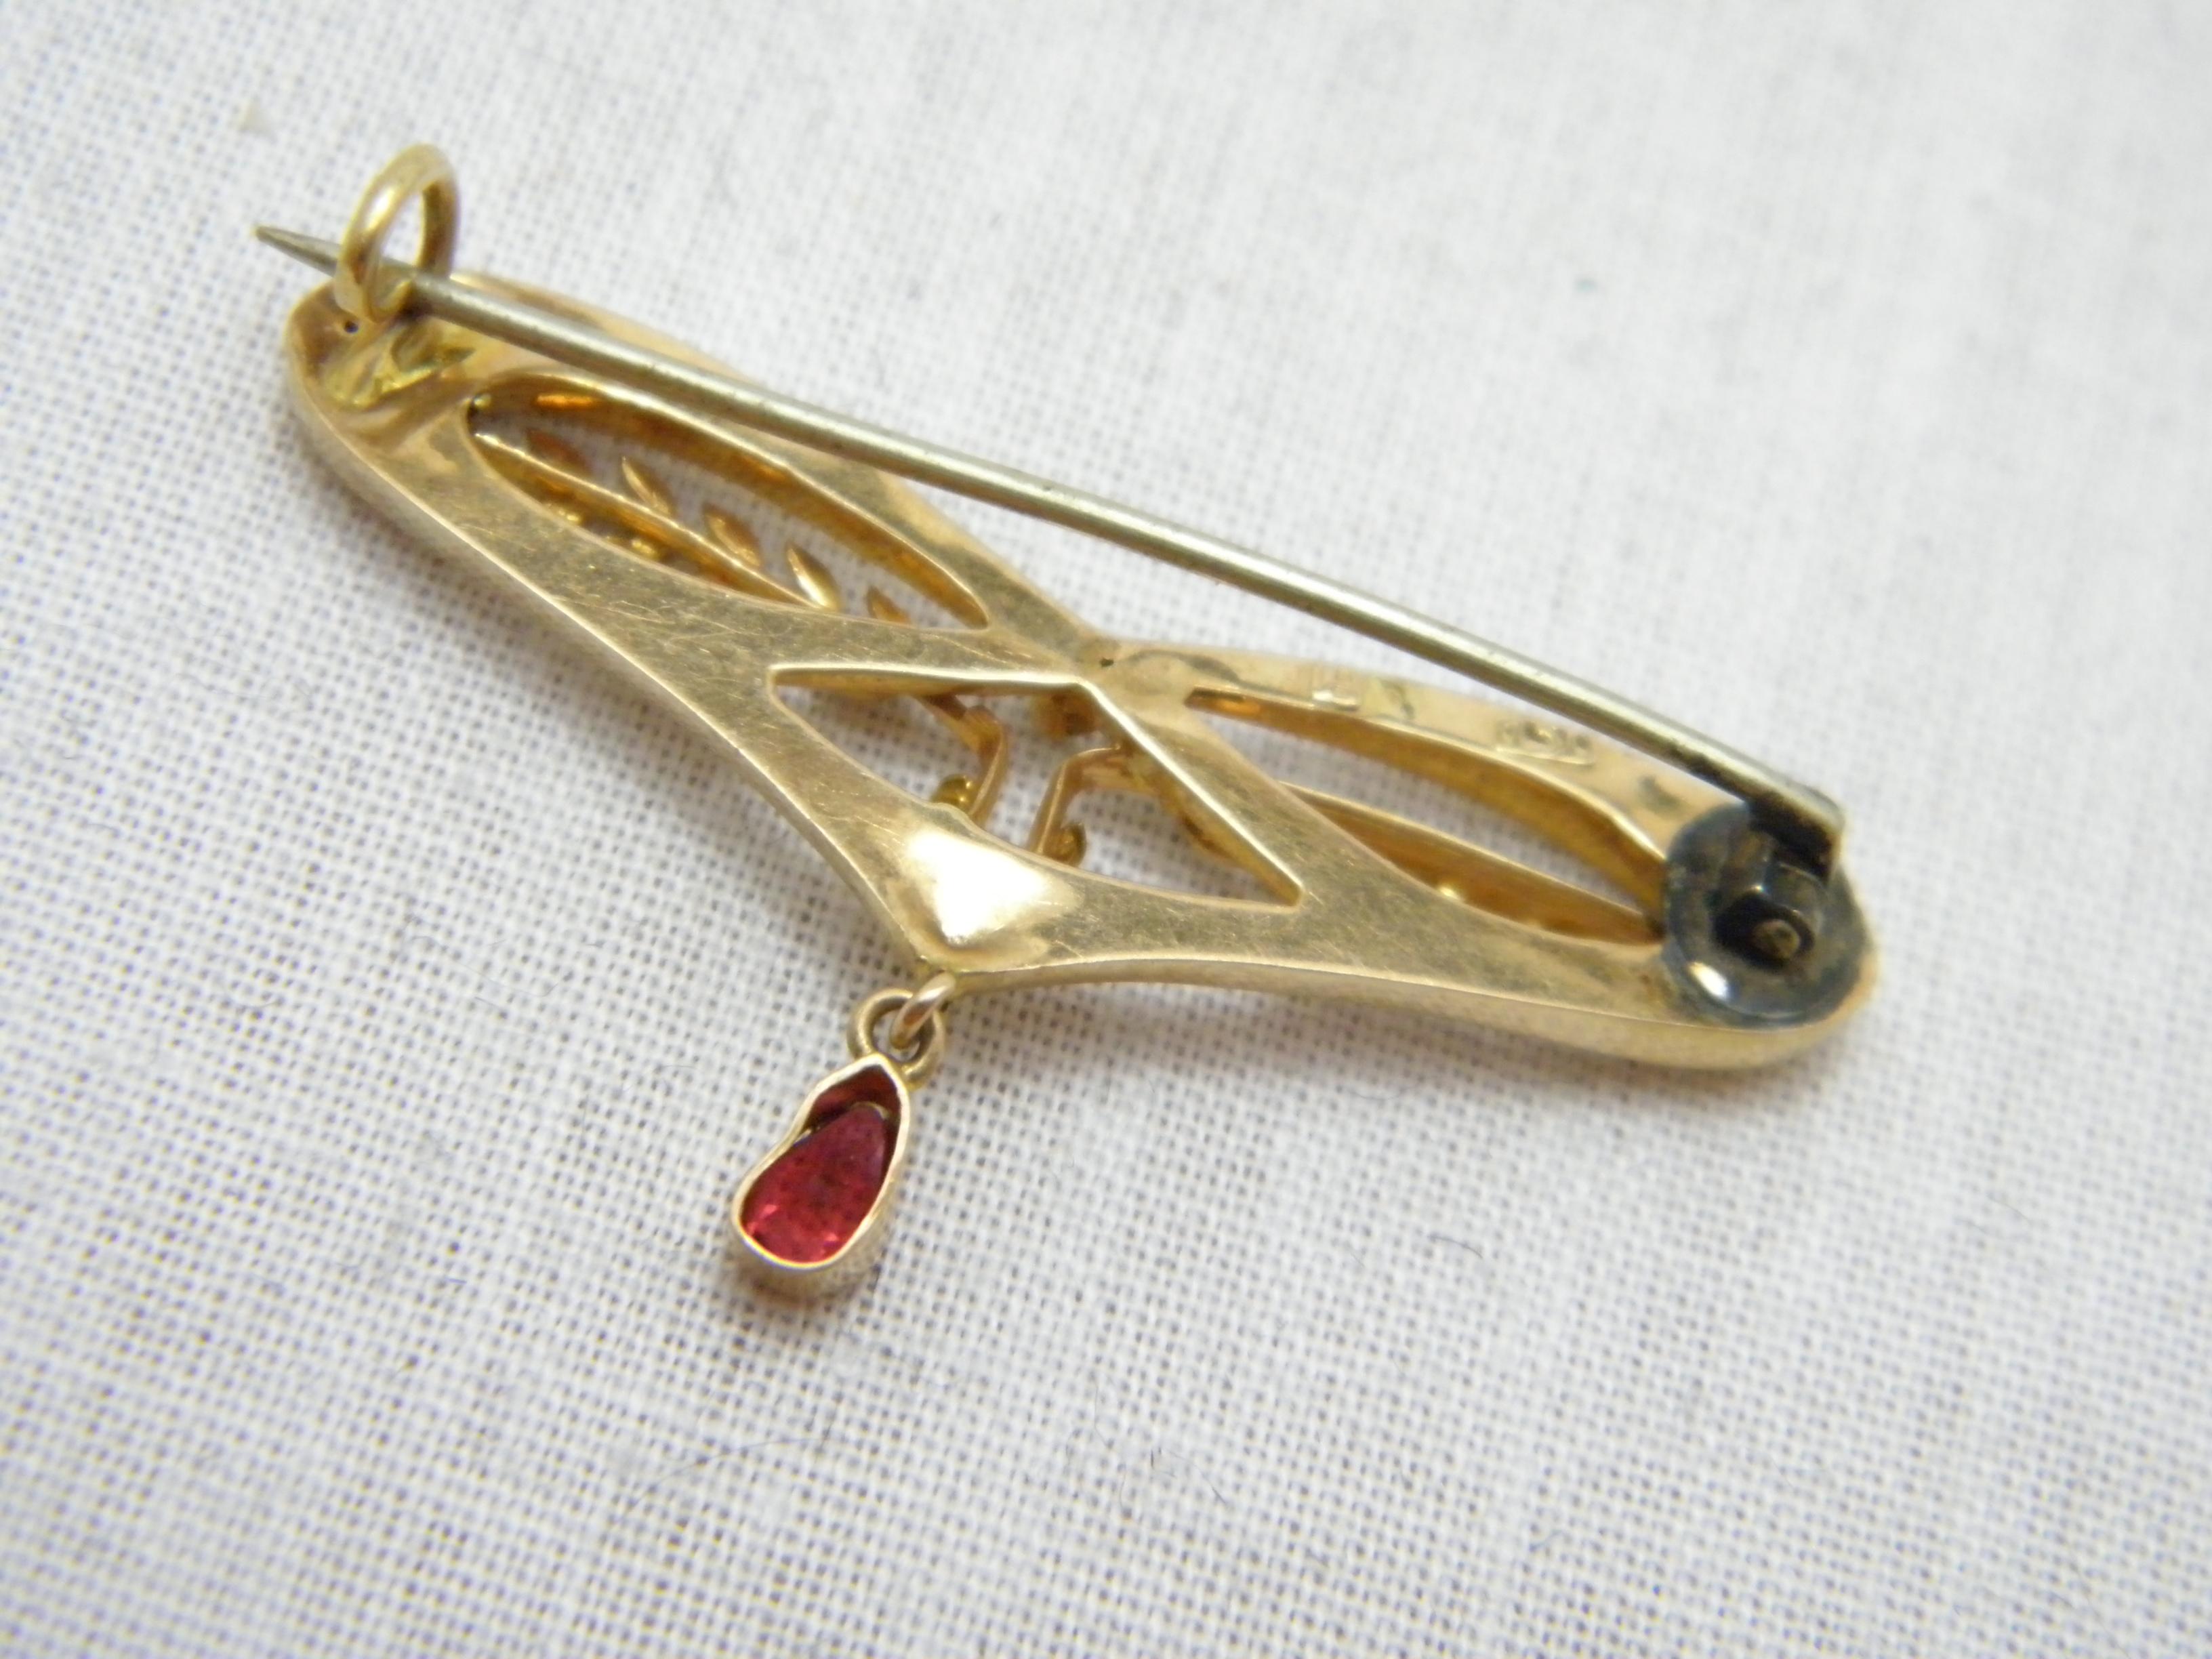 Women's or Men's Bargain Vintage 18ct Gold Ruby Harvest Festival Brooch Pin c1950 750 Purity For Sale